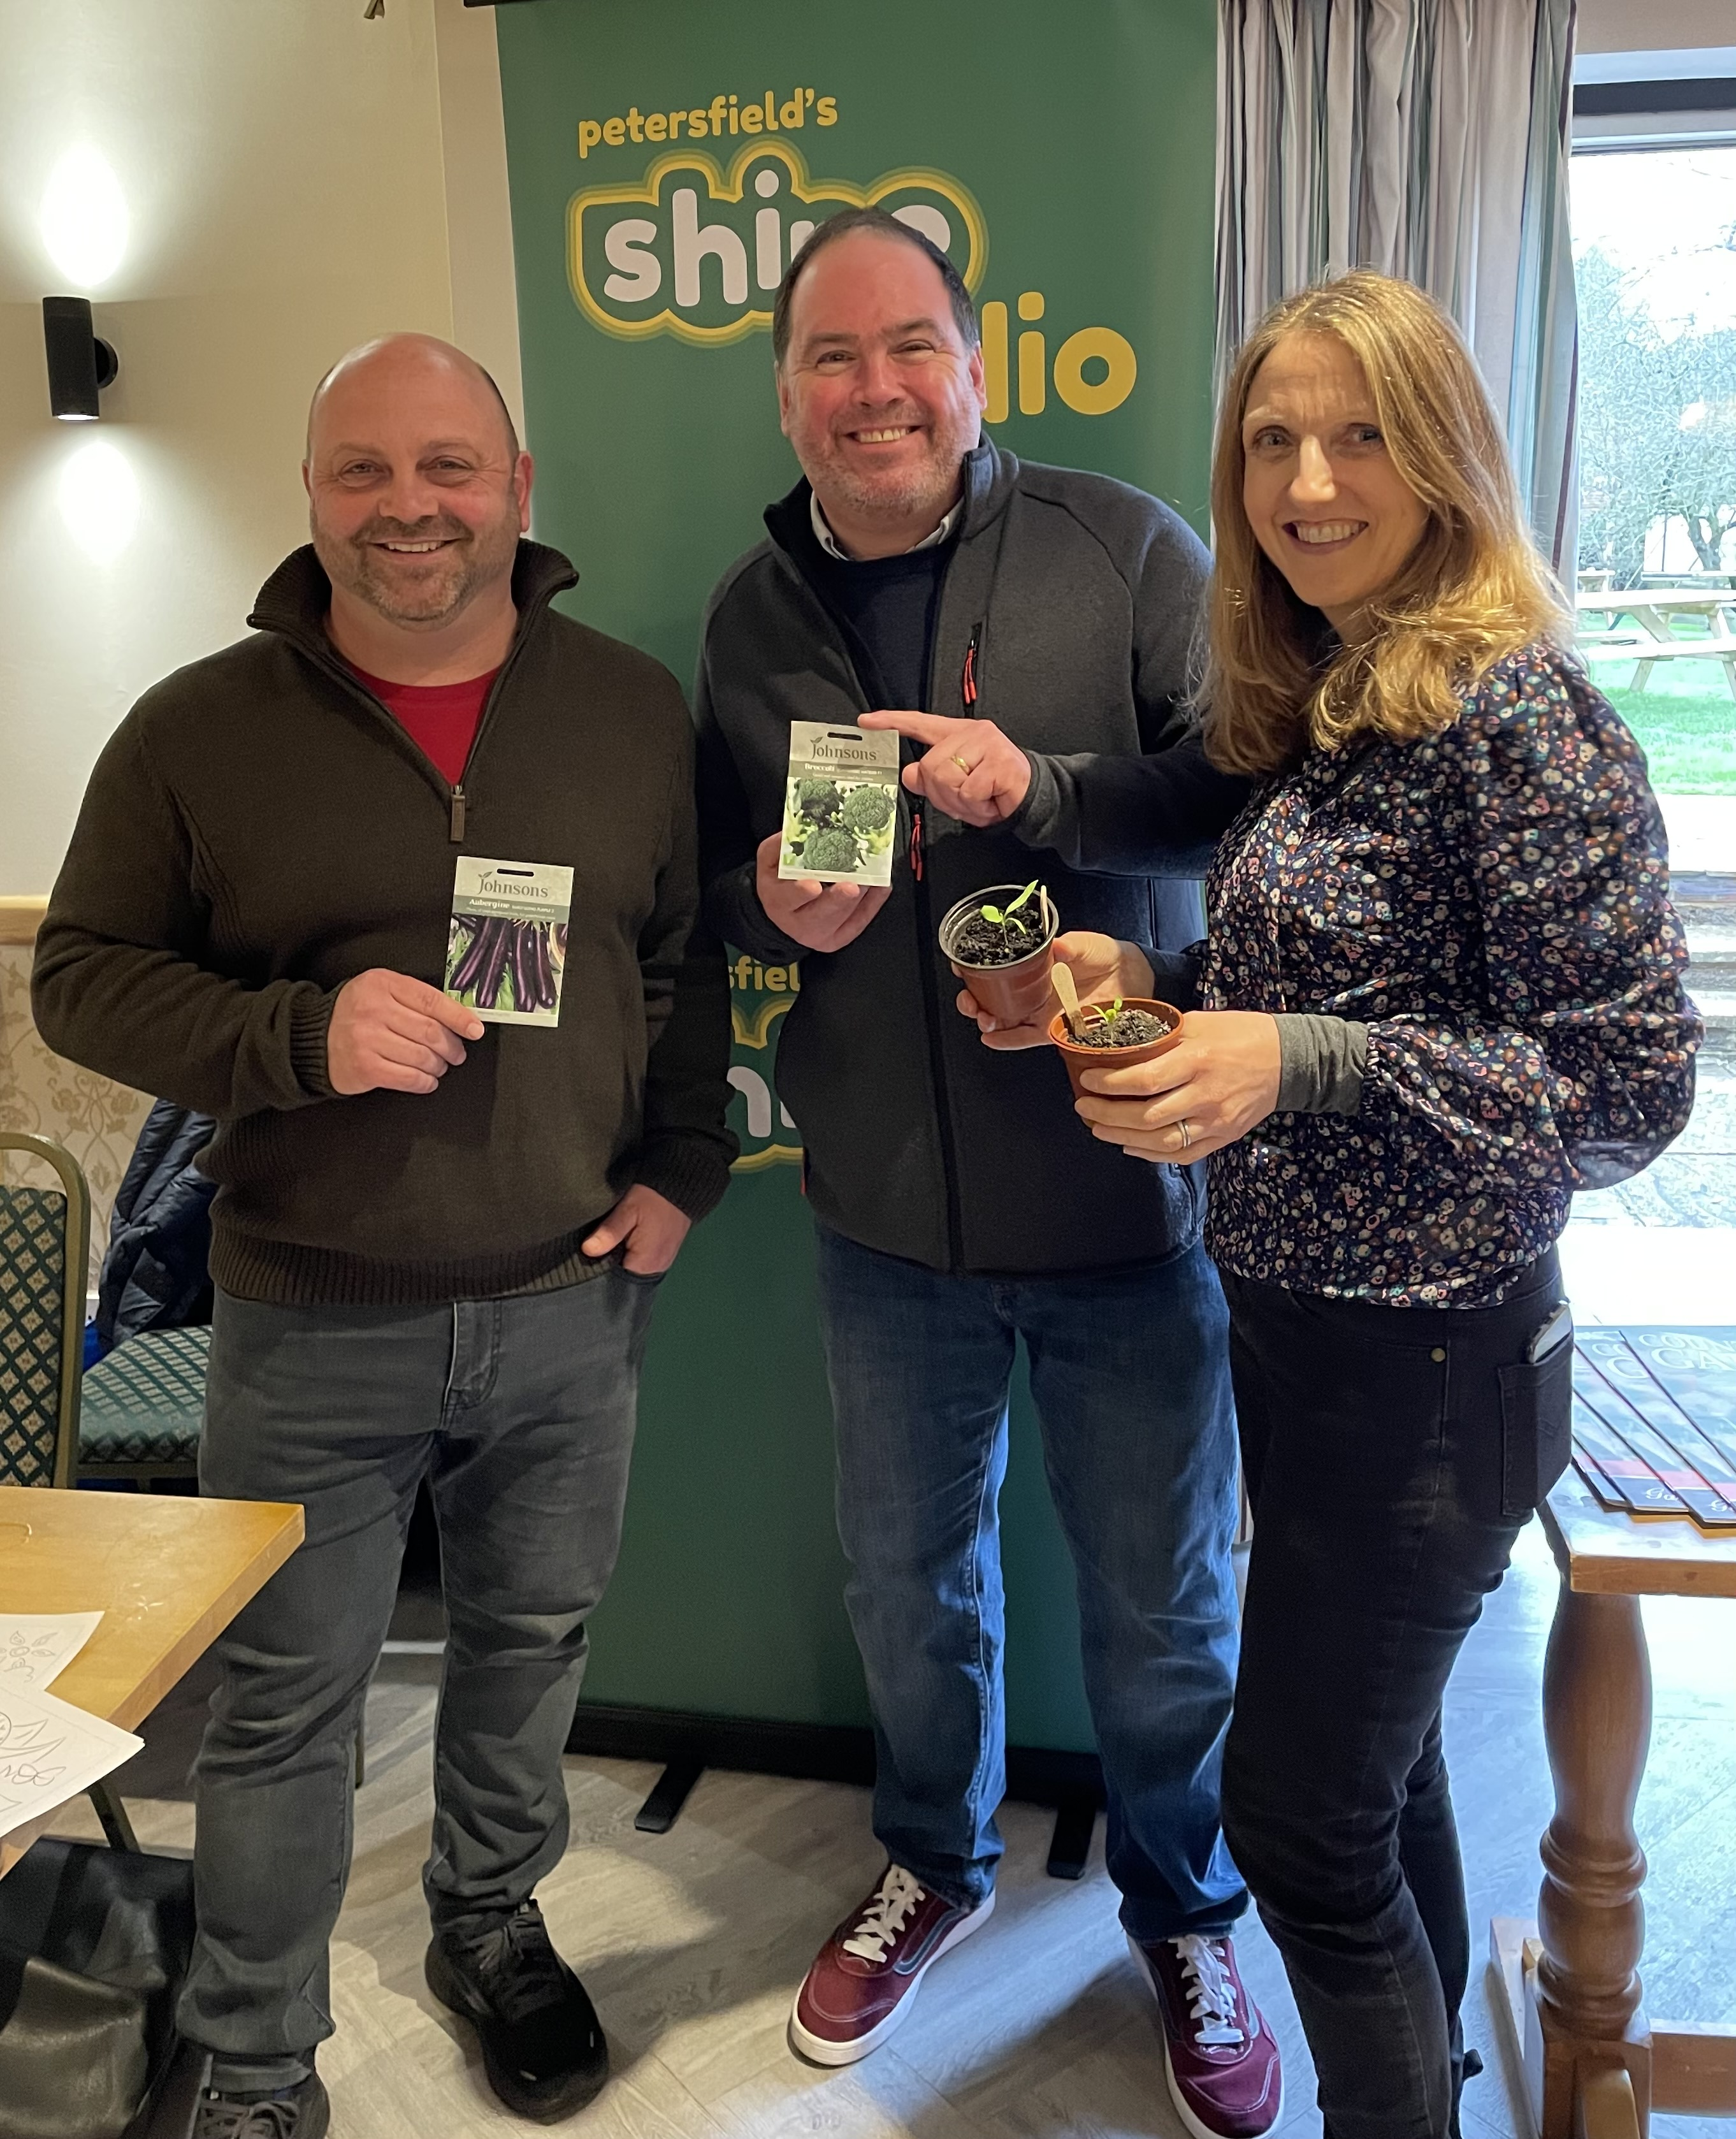 the P pod - Petersfield personalities - 27 March 2023: Seed Swap